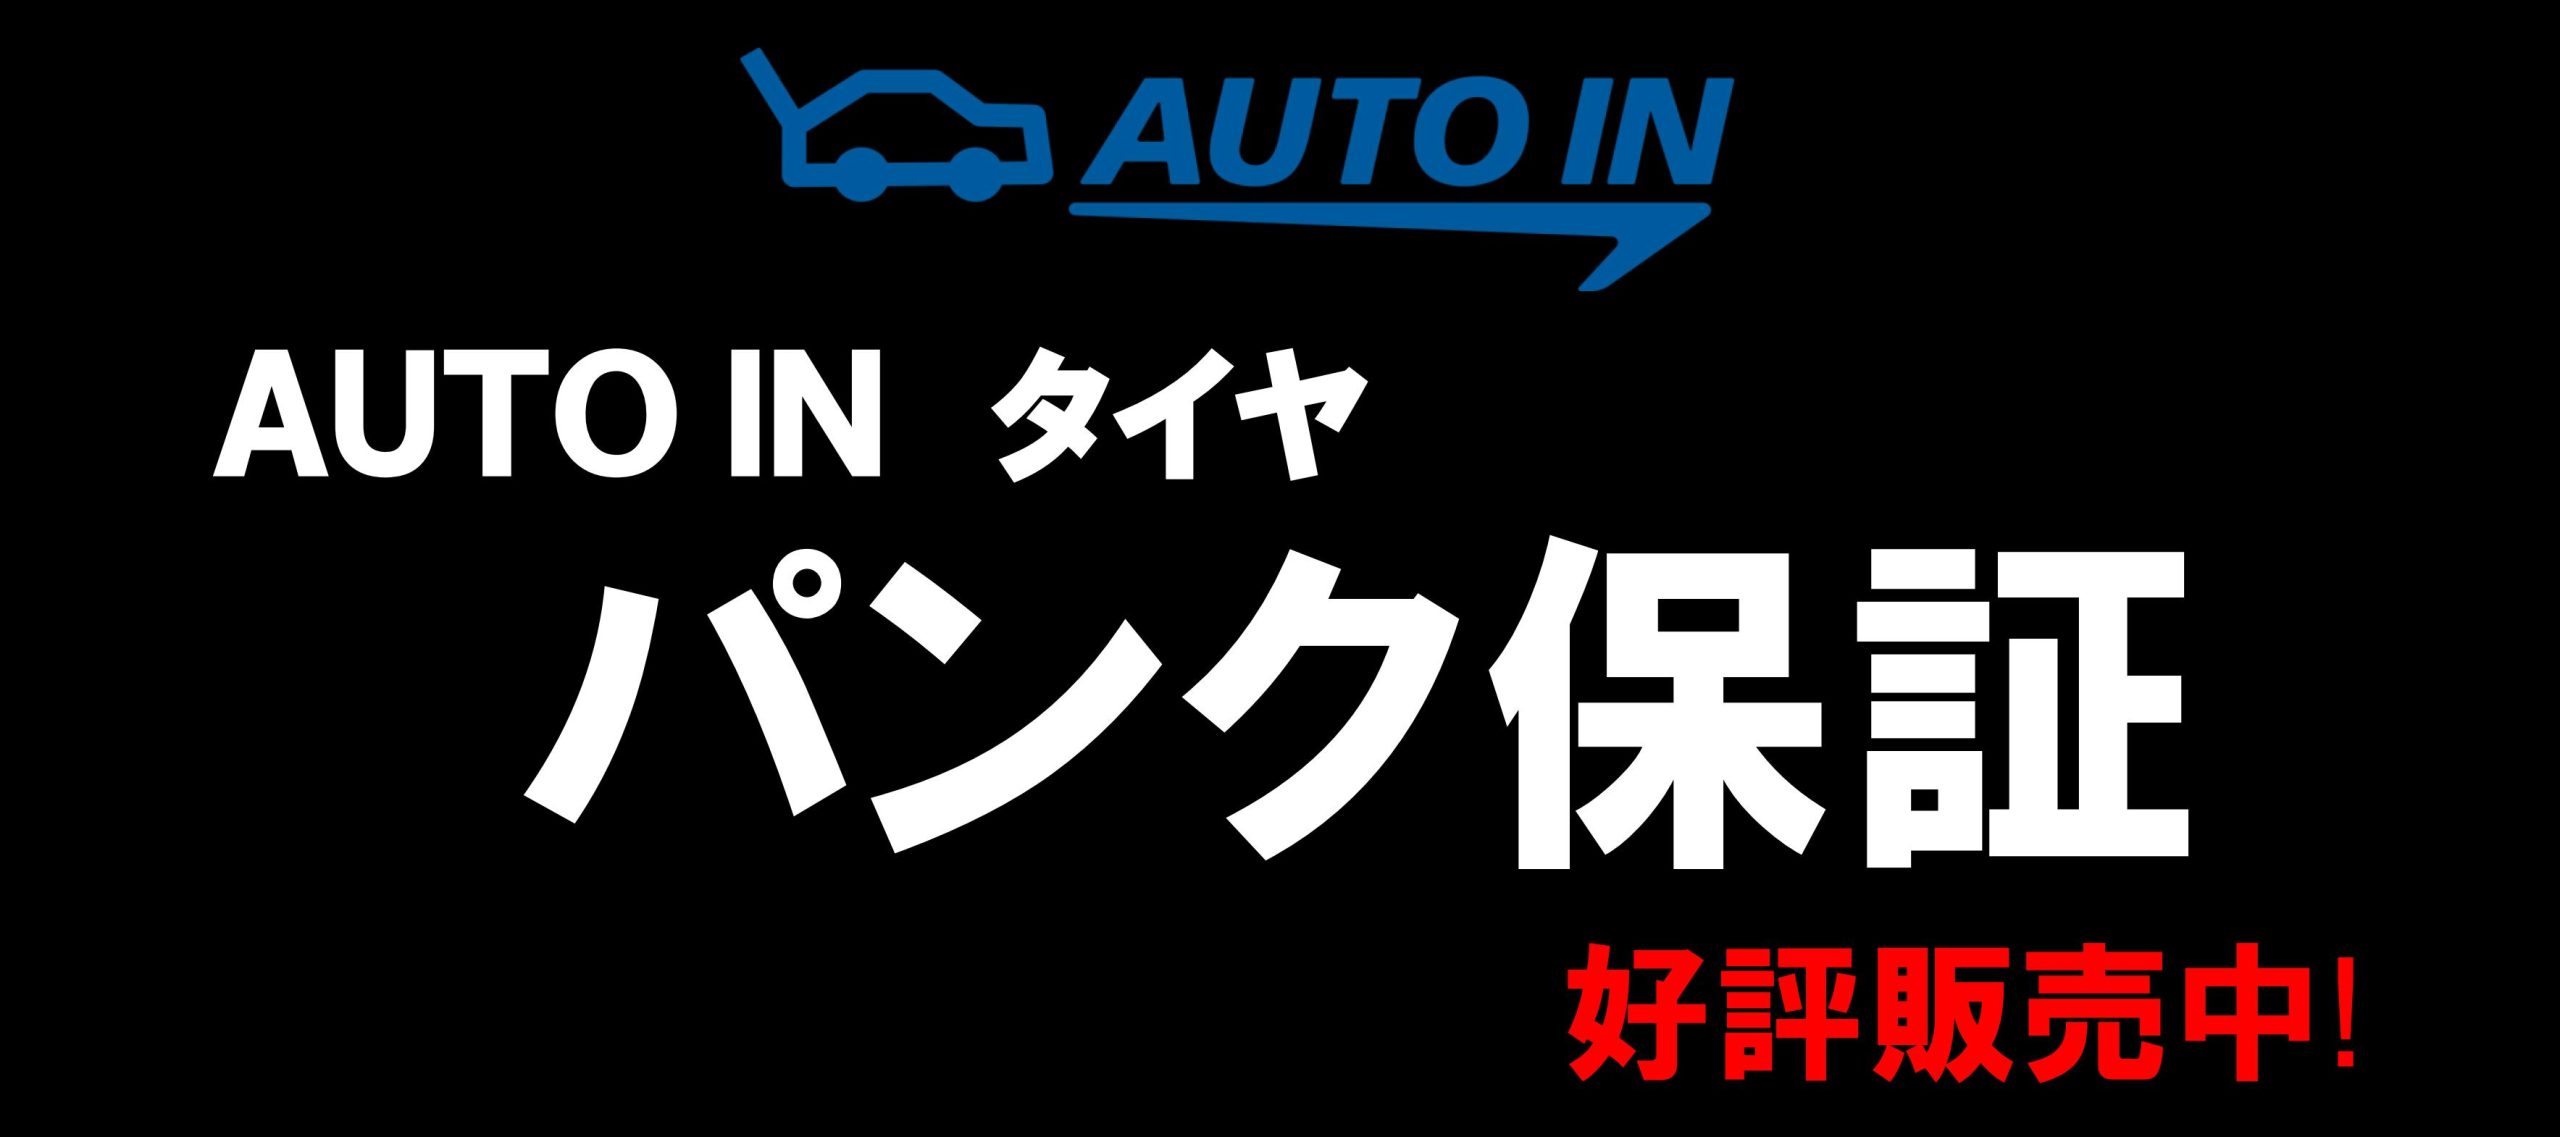 AUTO INタイヤパンク保証、好評販売中！